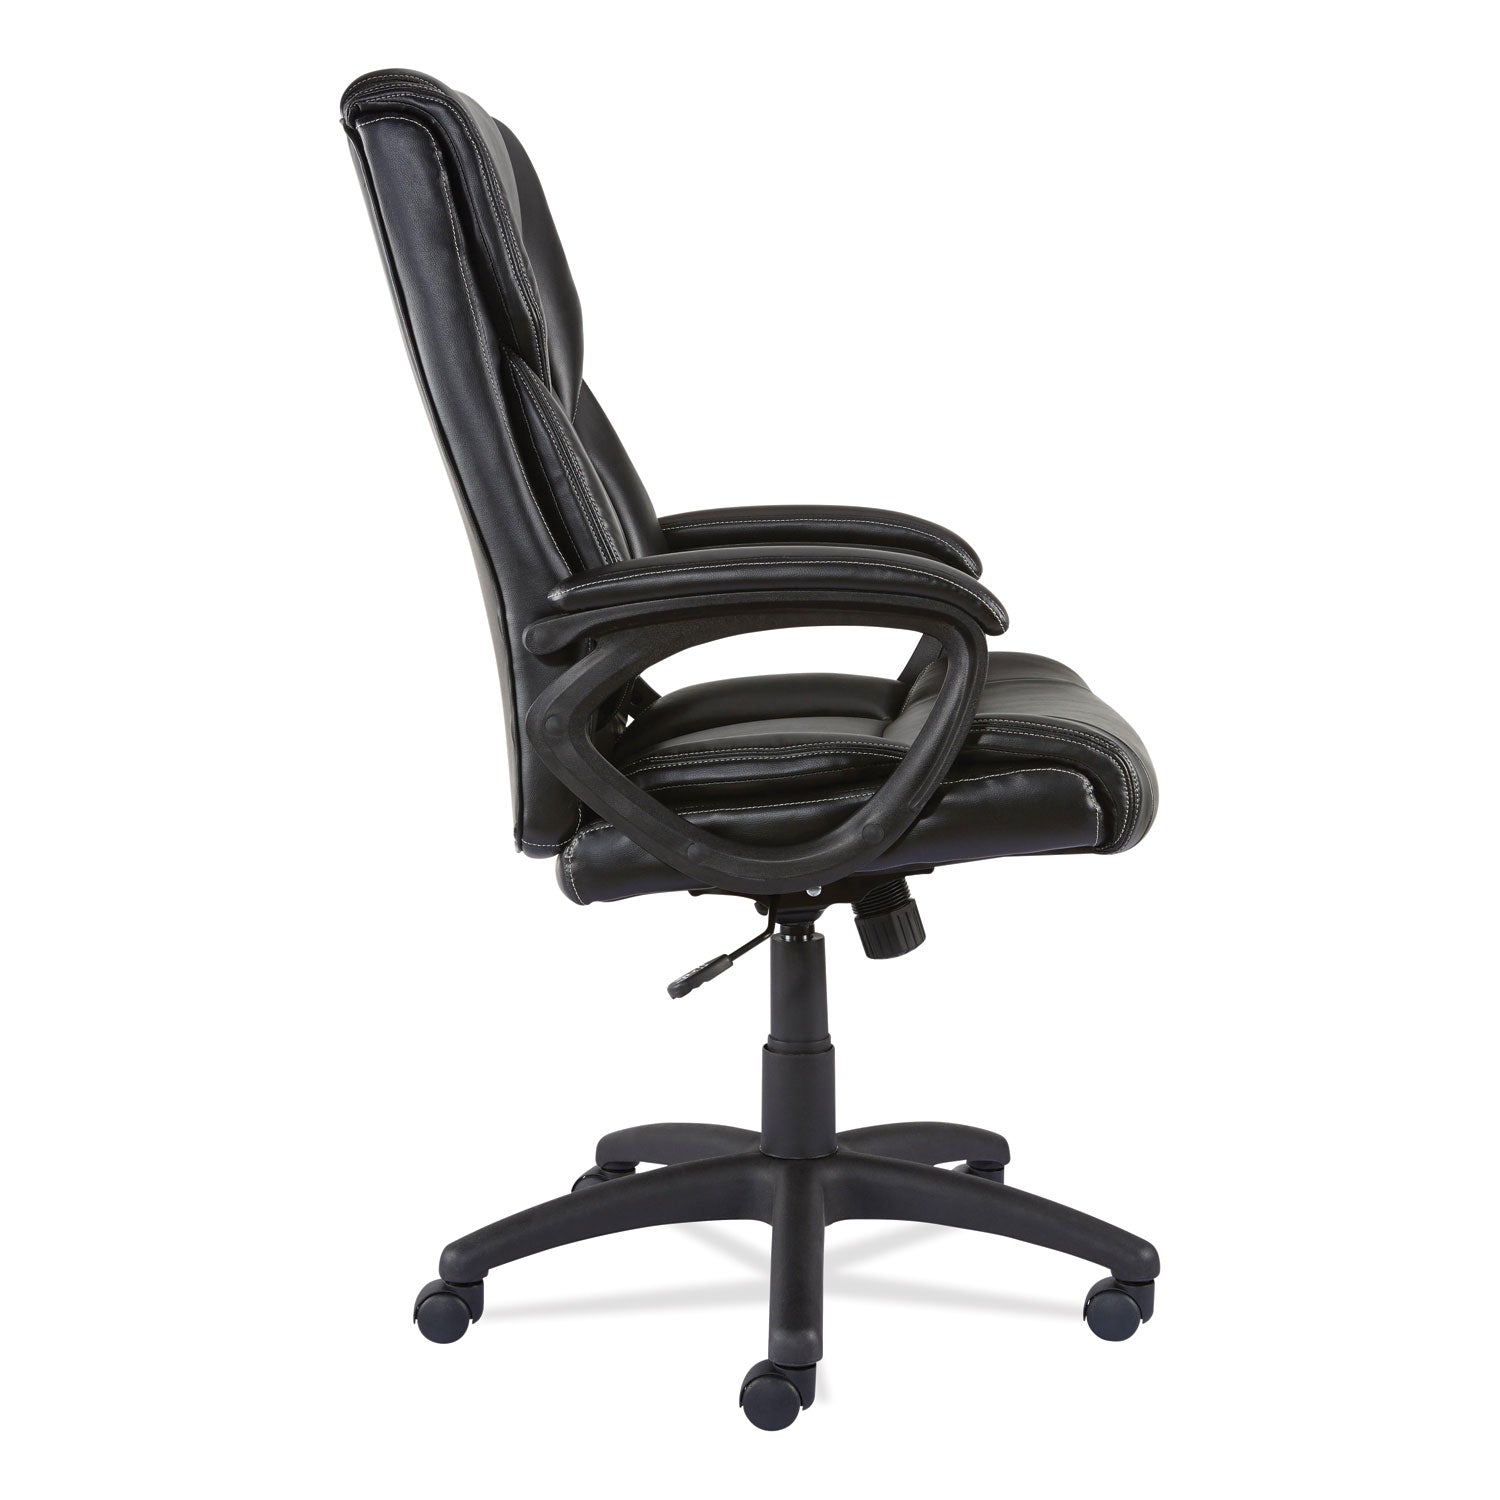 alera-brosna-series-mid-back-task-chair-supports-up-to-250-lb-1815-to-2177-seat-height-brown-seat-back-brown-base_alebrn42b59 - 4